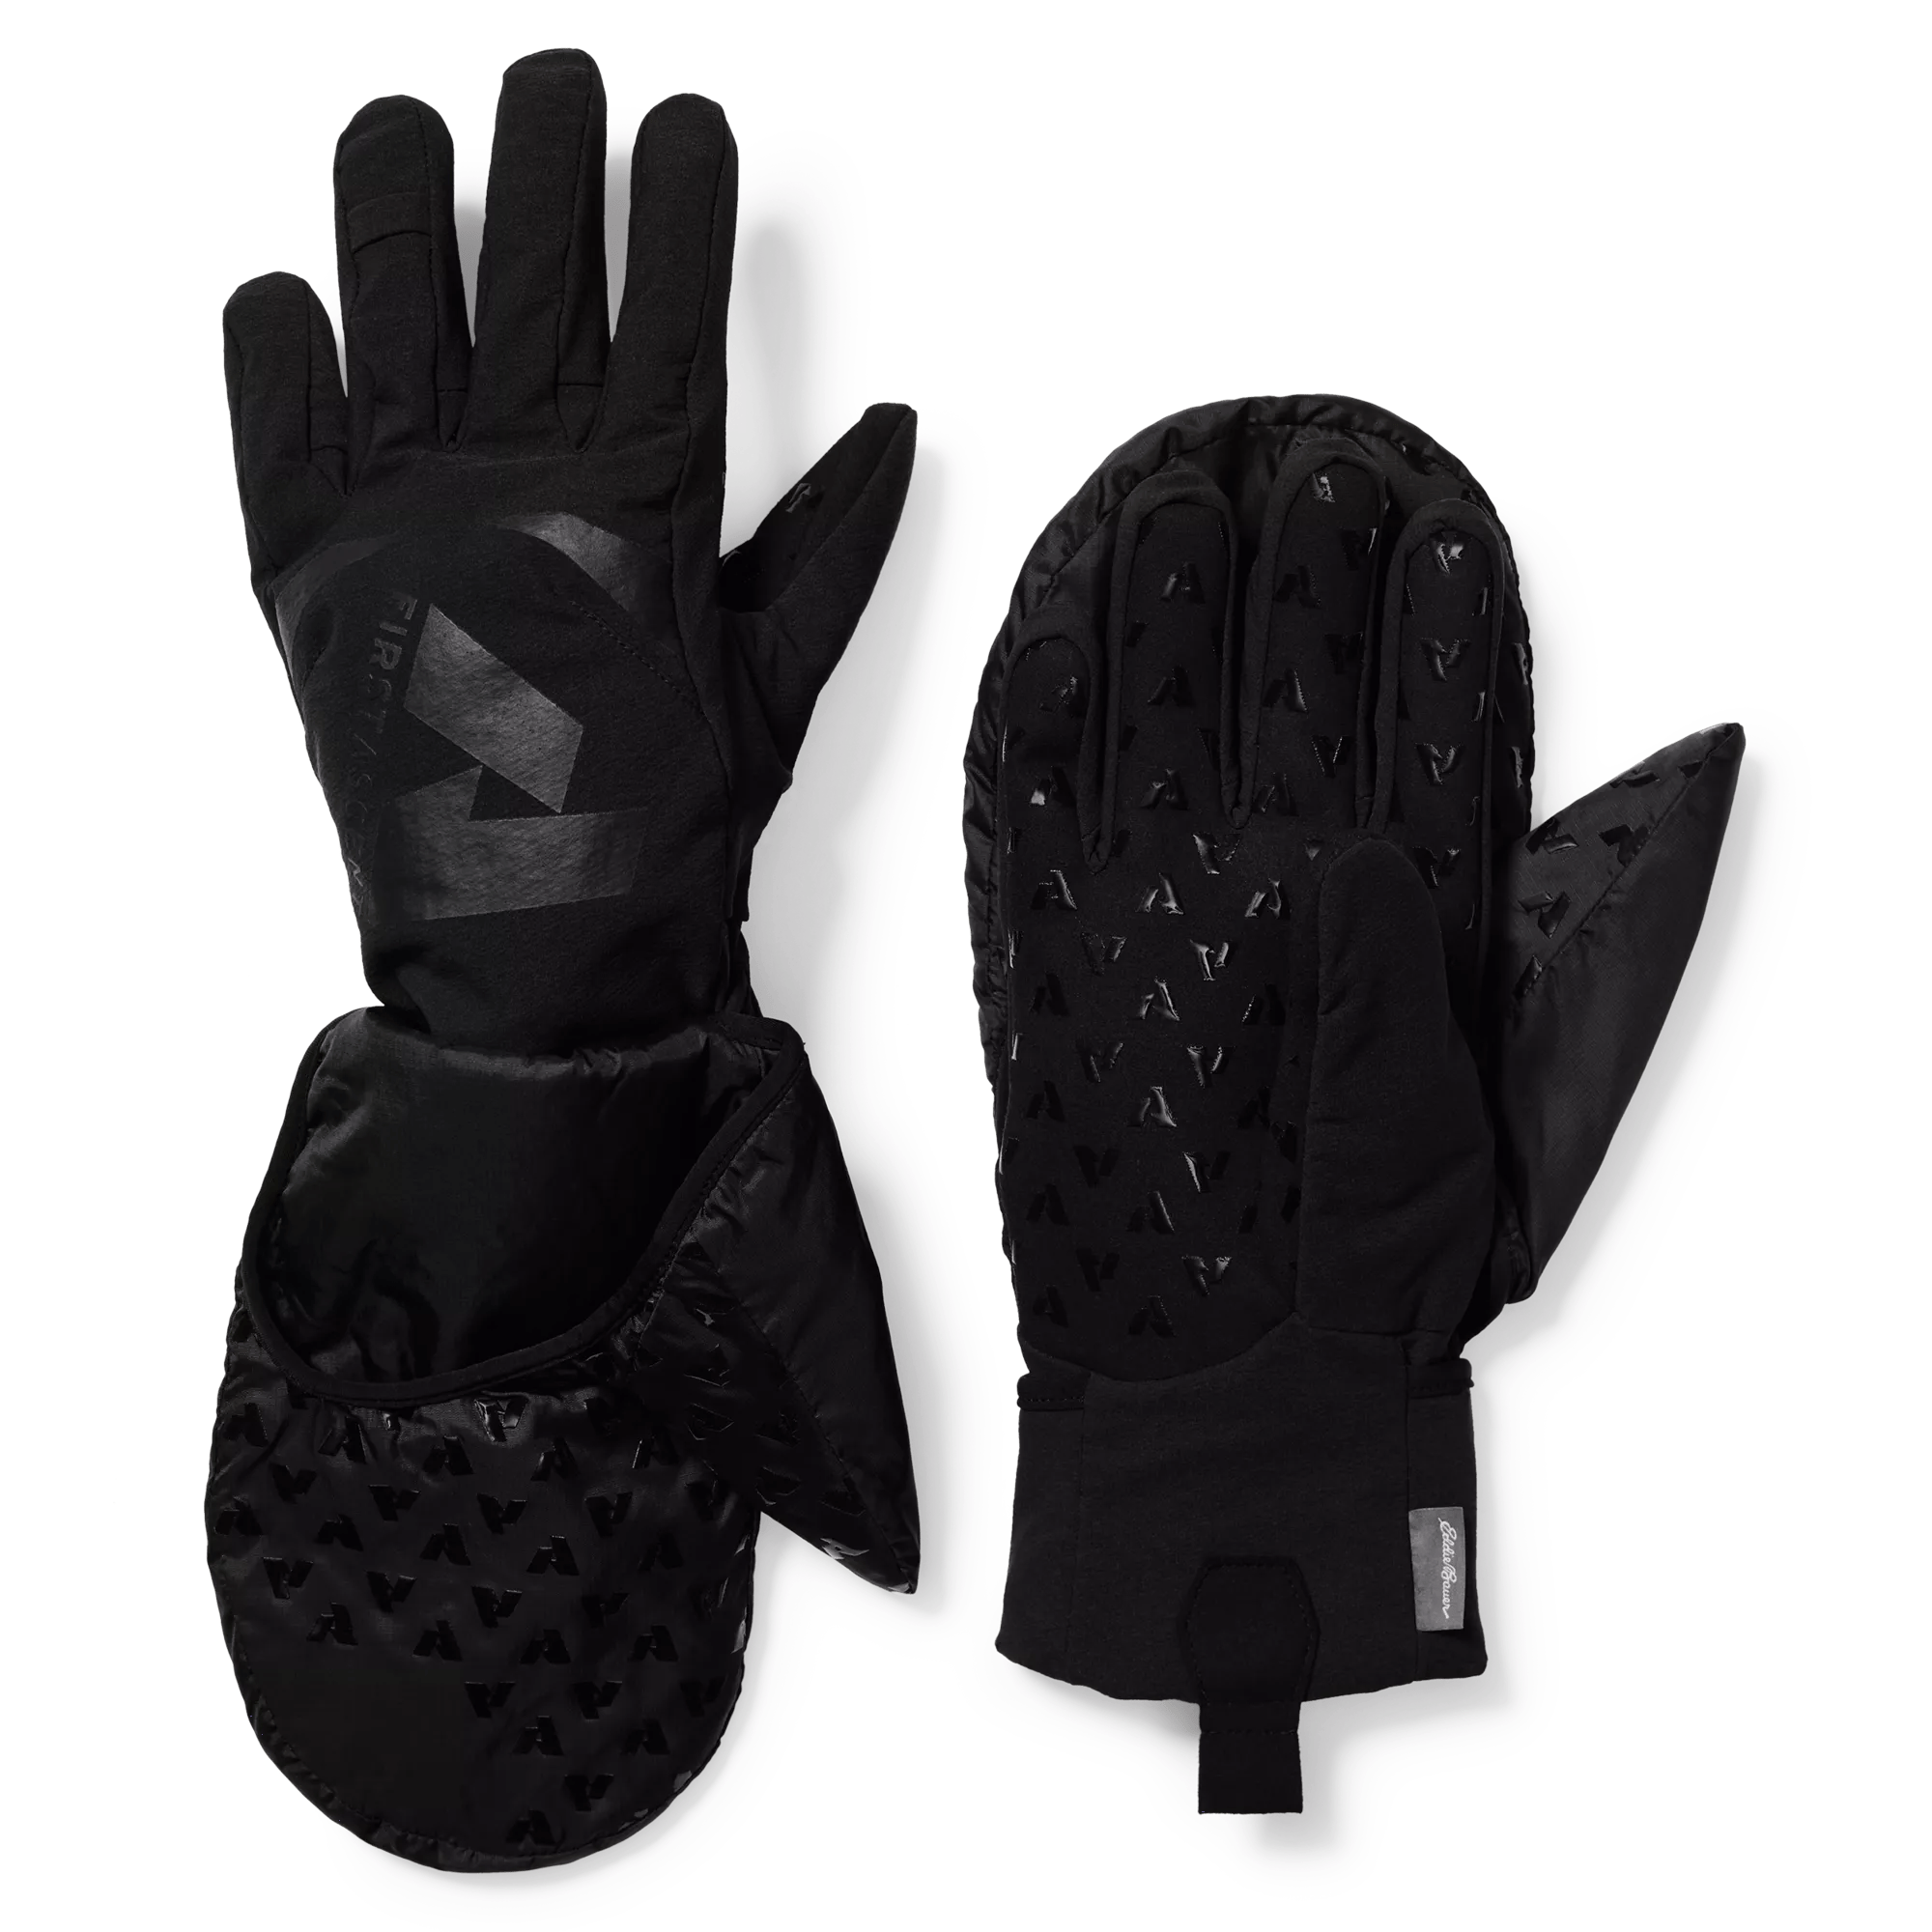 Guide Pro Adaptor Gloves